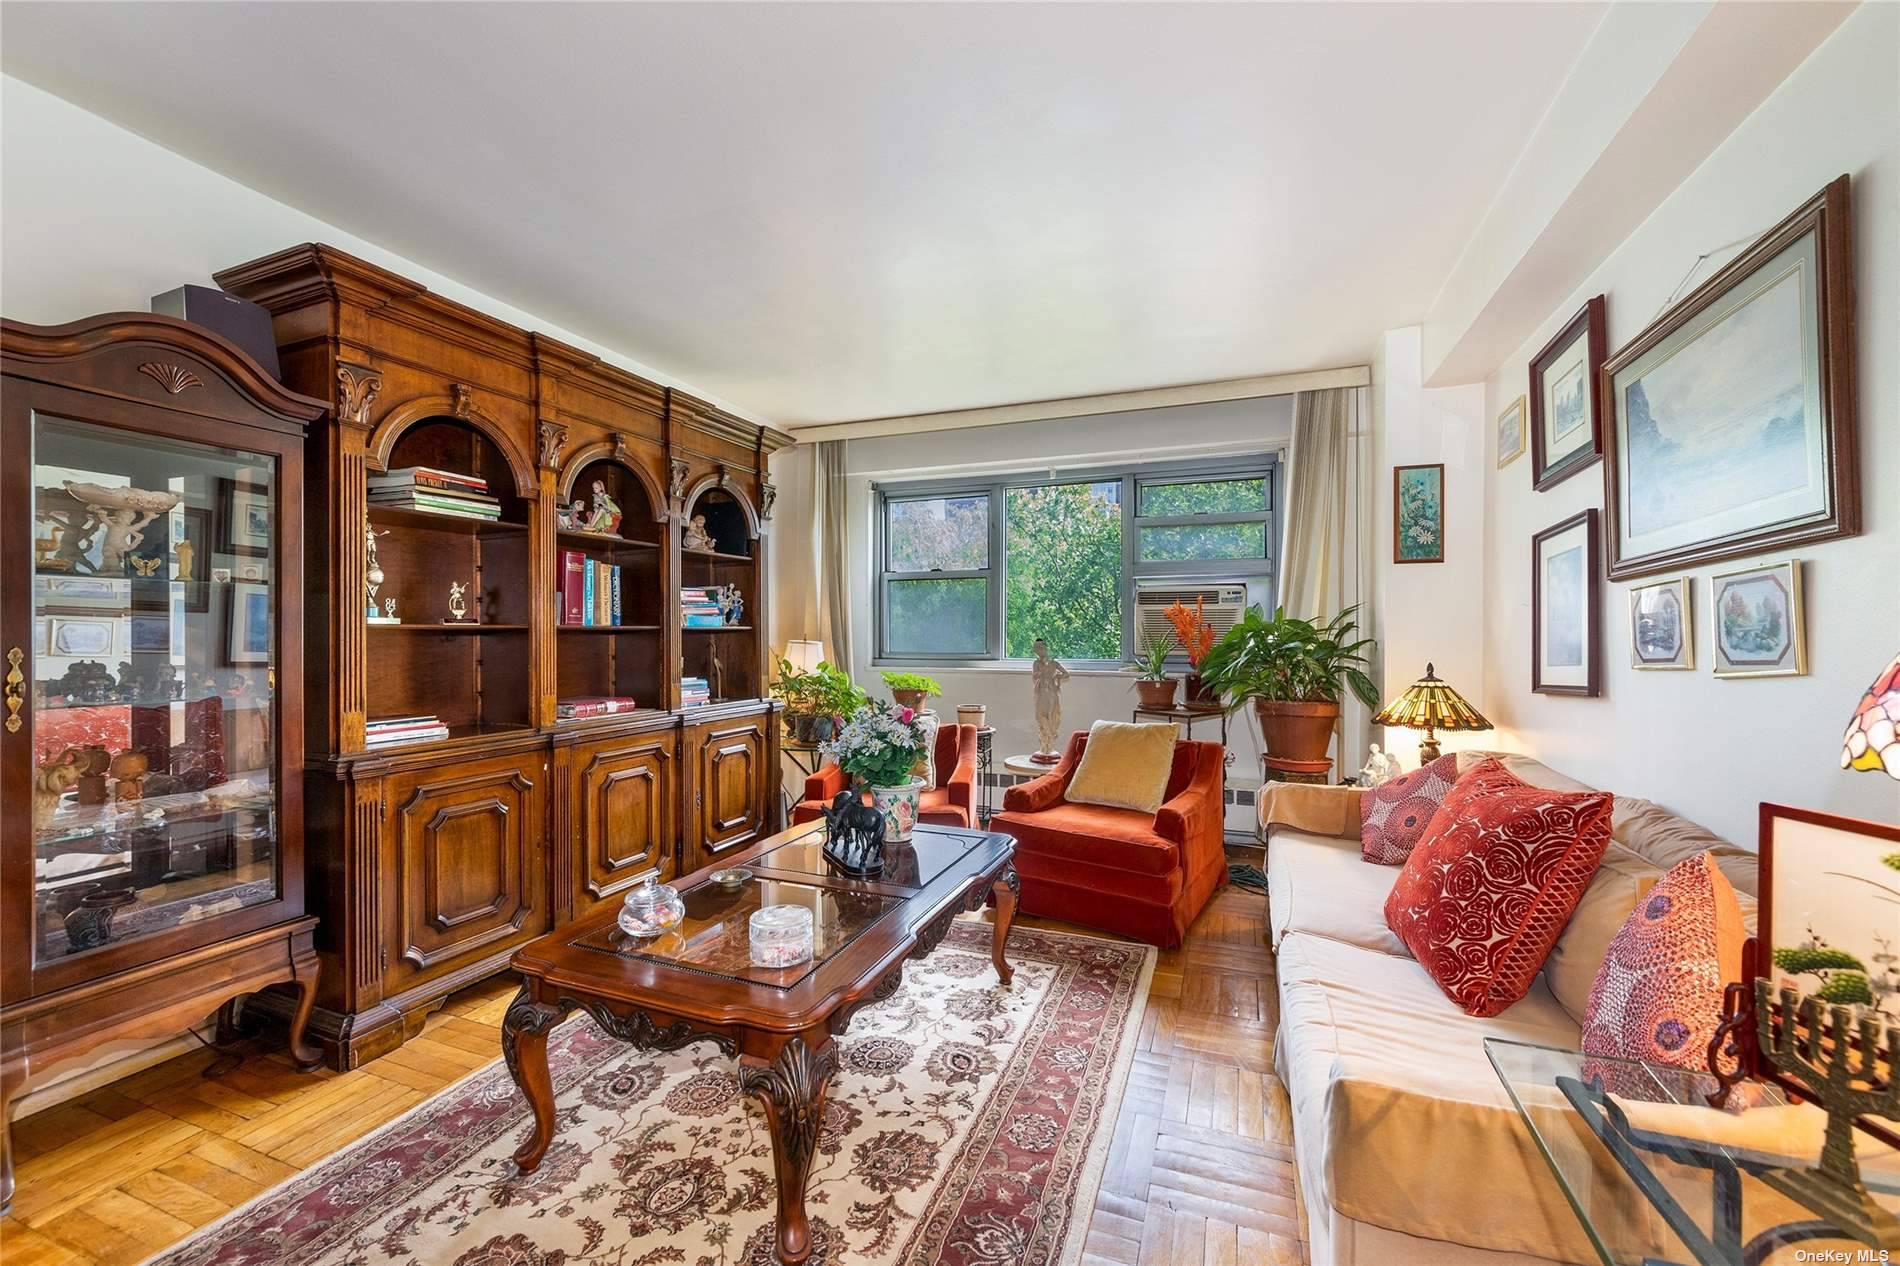 Welcome to this charming 2 bedroom, 2 bath co op located in the Concord Village with approx 1100sqf, nestled on the vibrate border of DUMBO, Brooklyn Heights and Downtown Brooklyn.